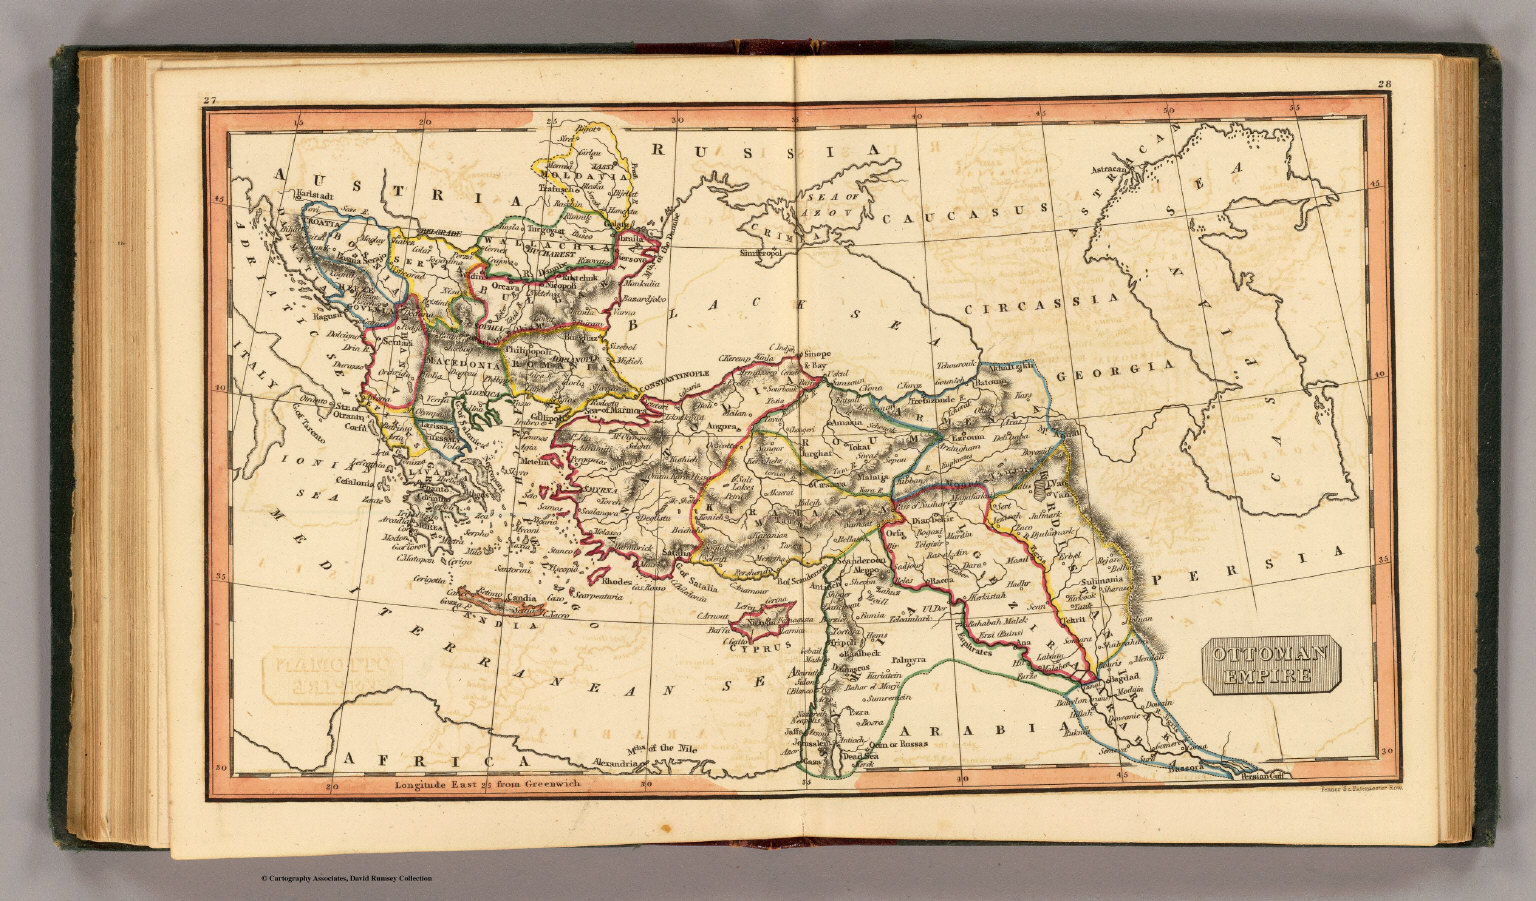 Ottoman Empire David Rumsey Historical Map Collection